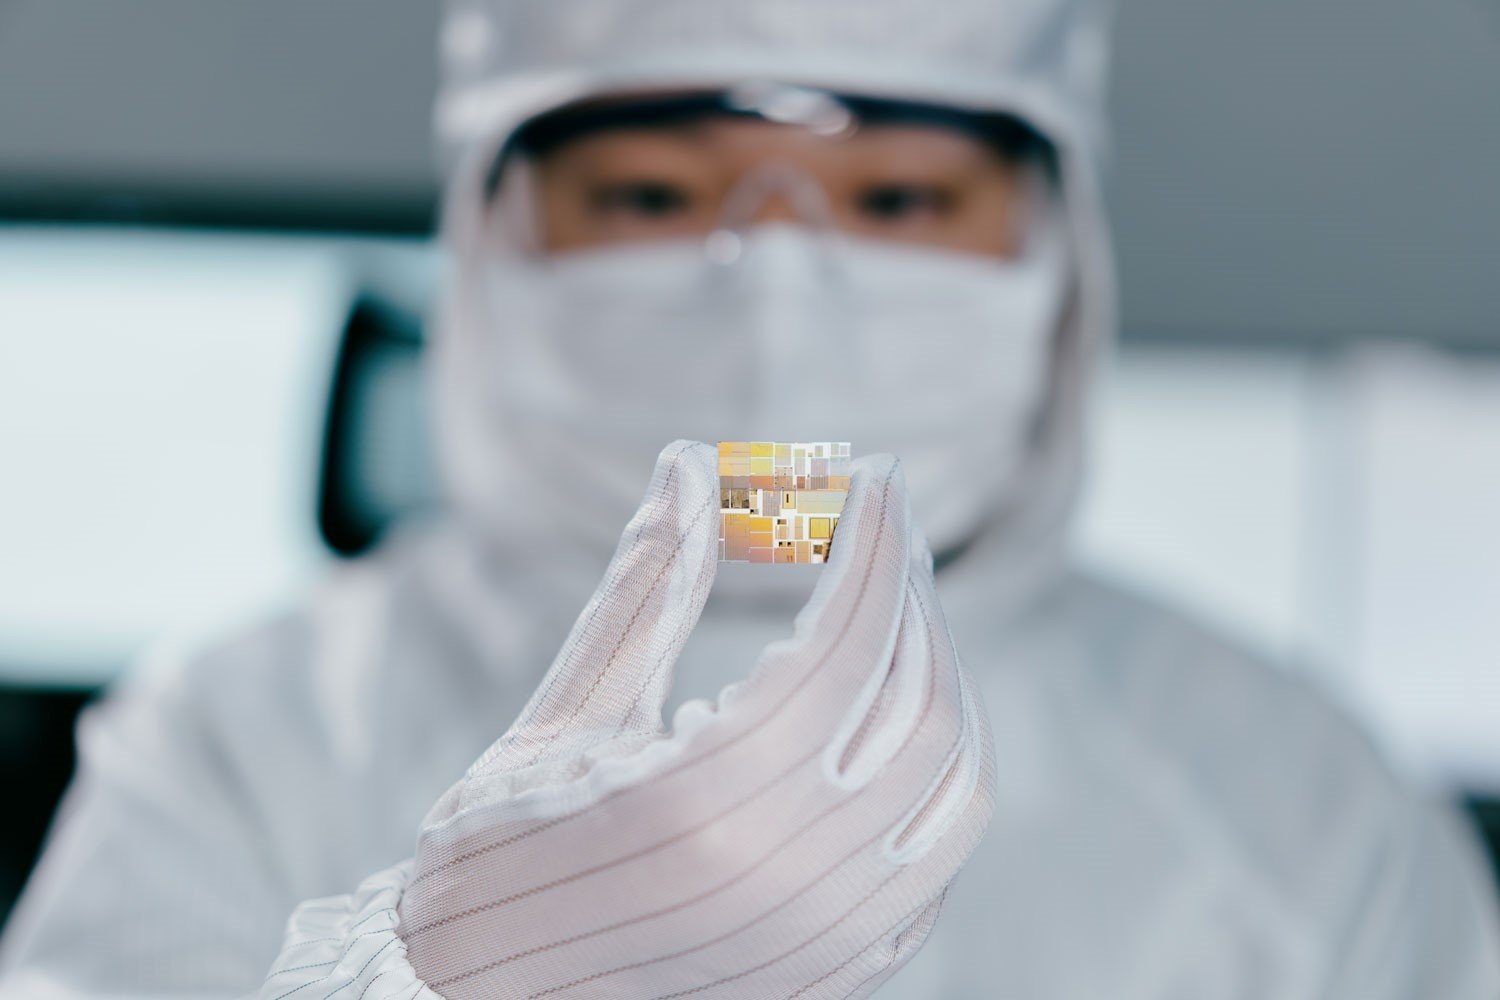 Scientist wearing PPE researchs chips in laboratory.